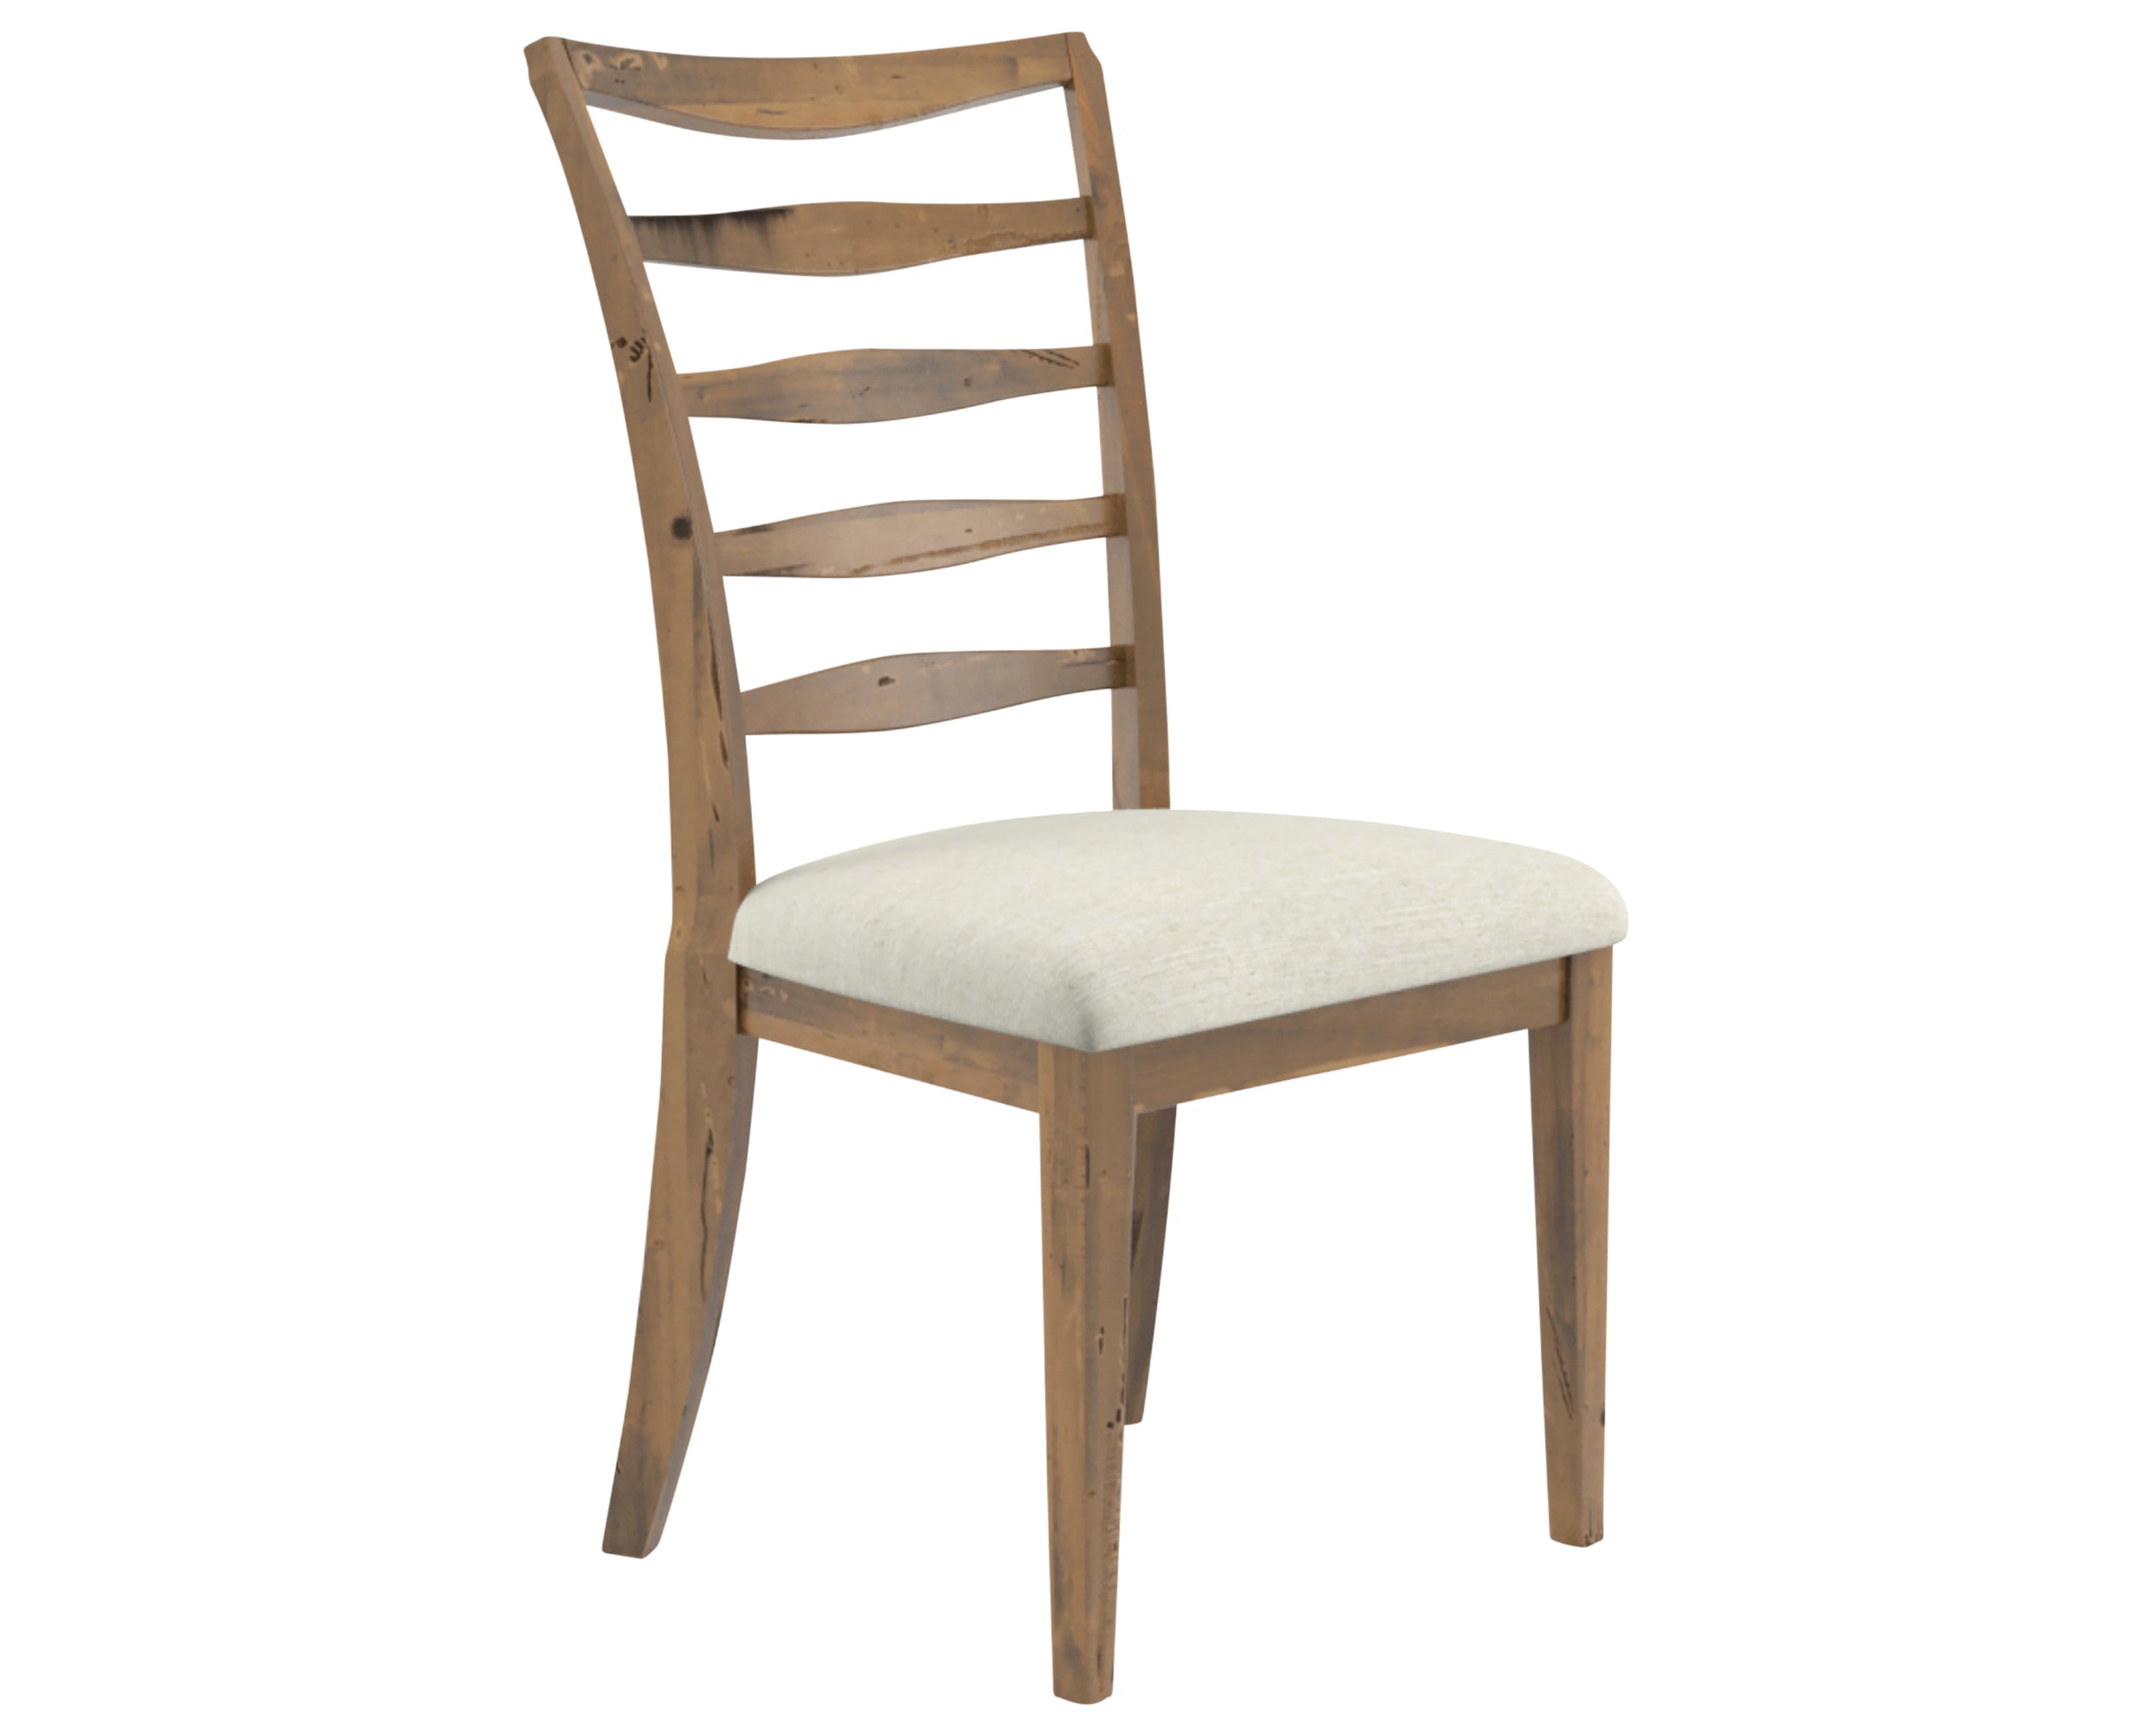 Oak Washed and Fabric TW | Canadel Champlain Dining Chair 5185 | Valley Ridge Furniture